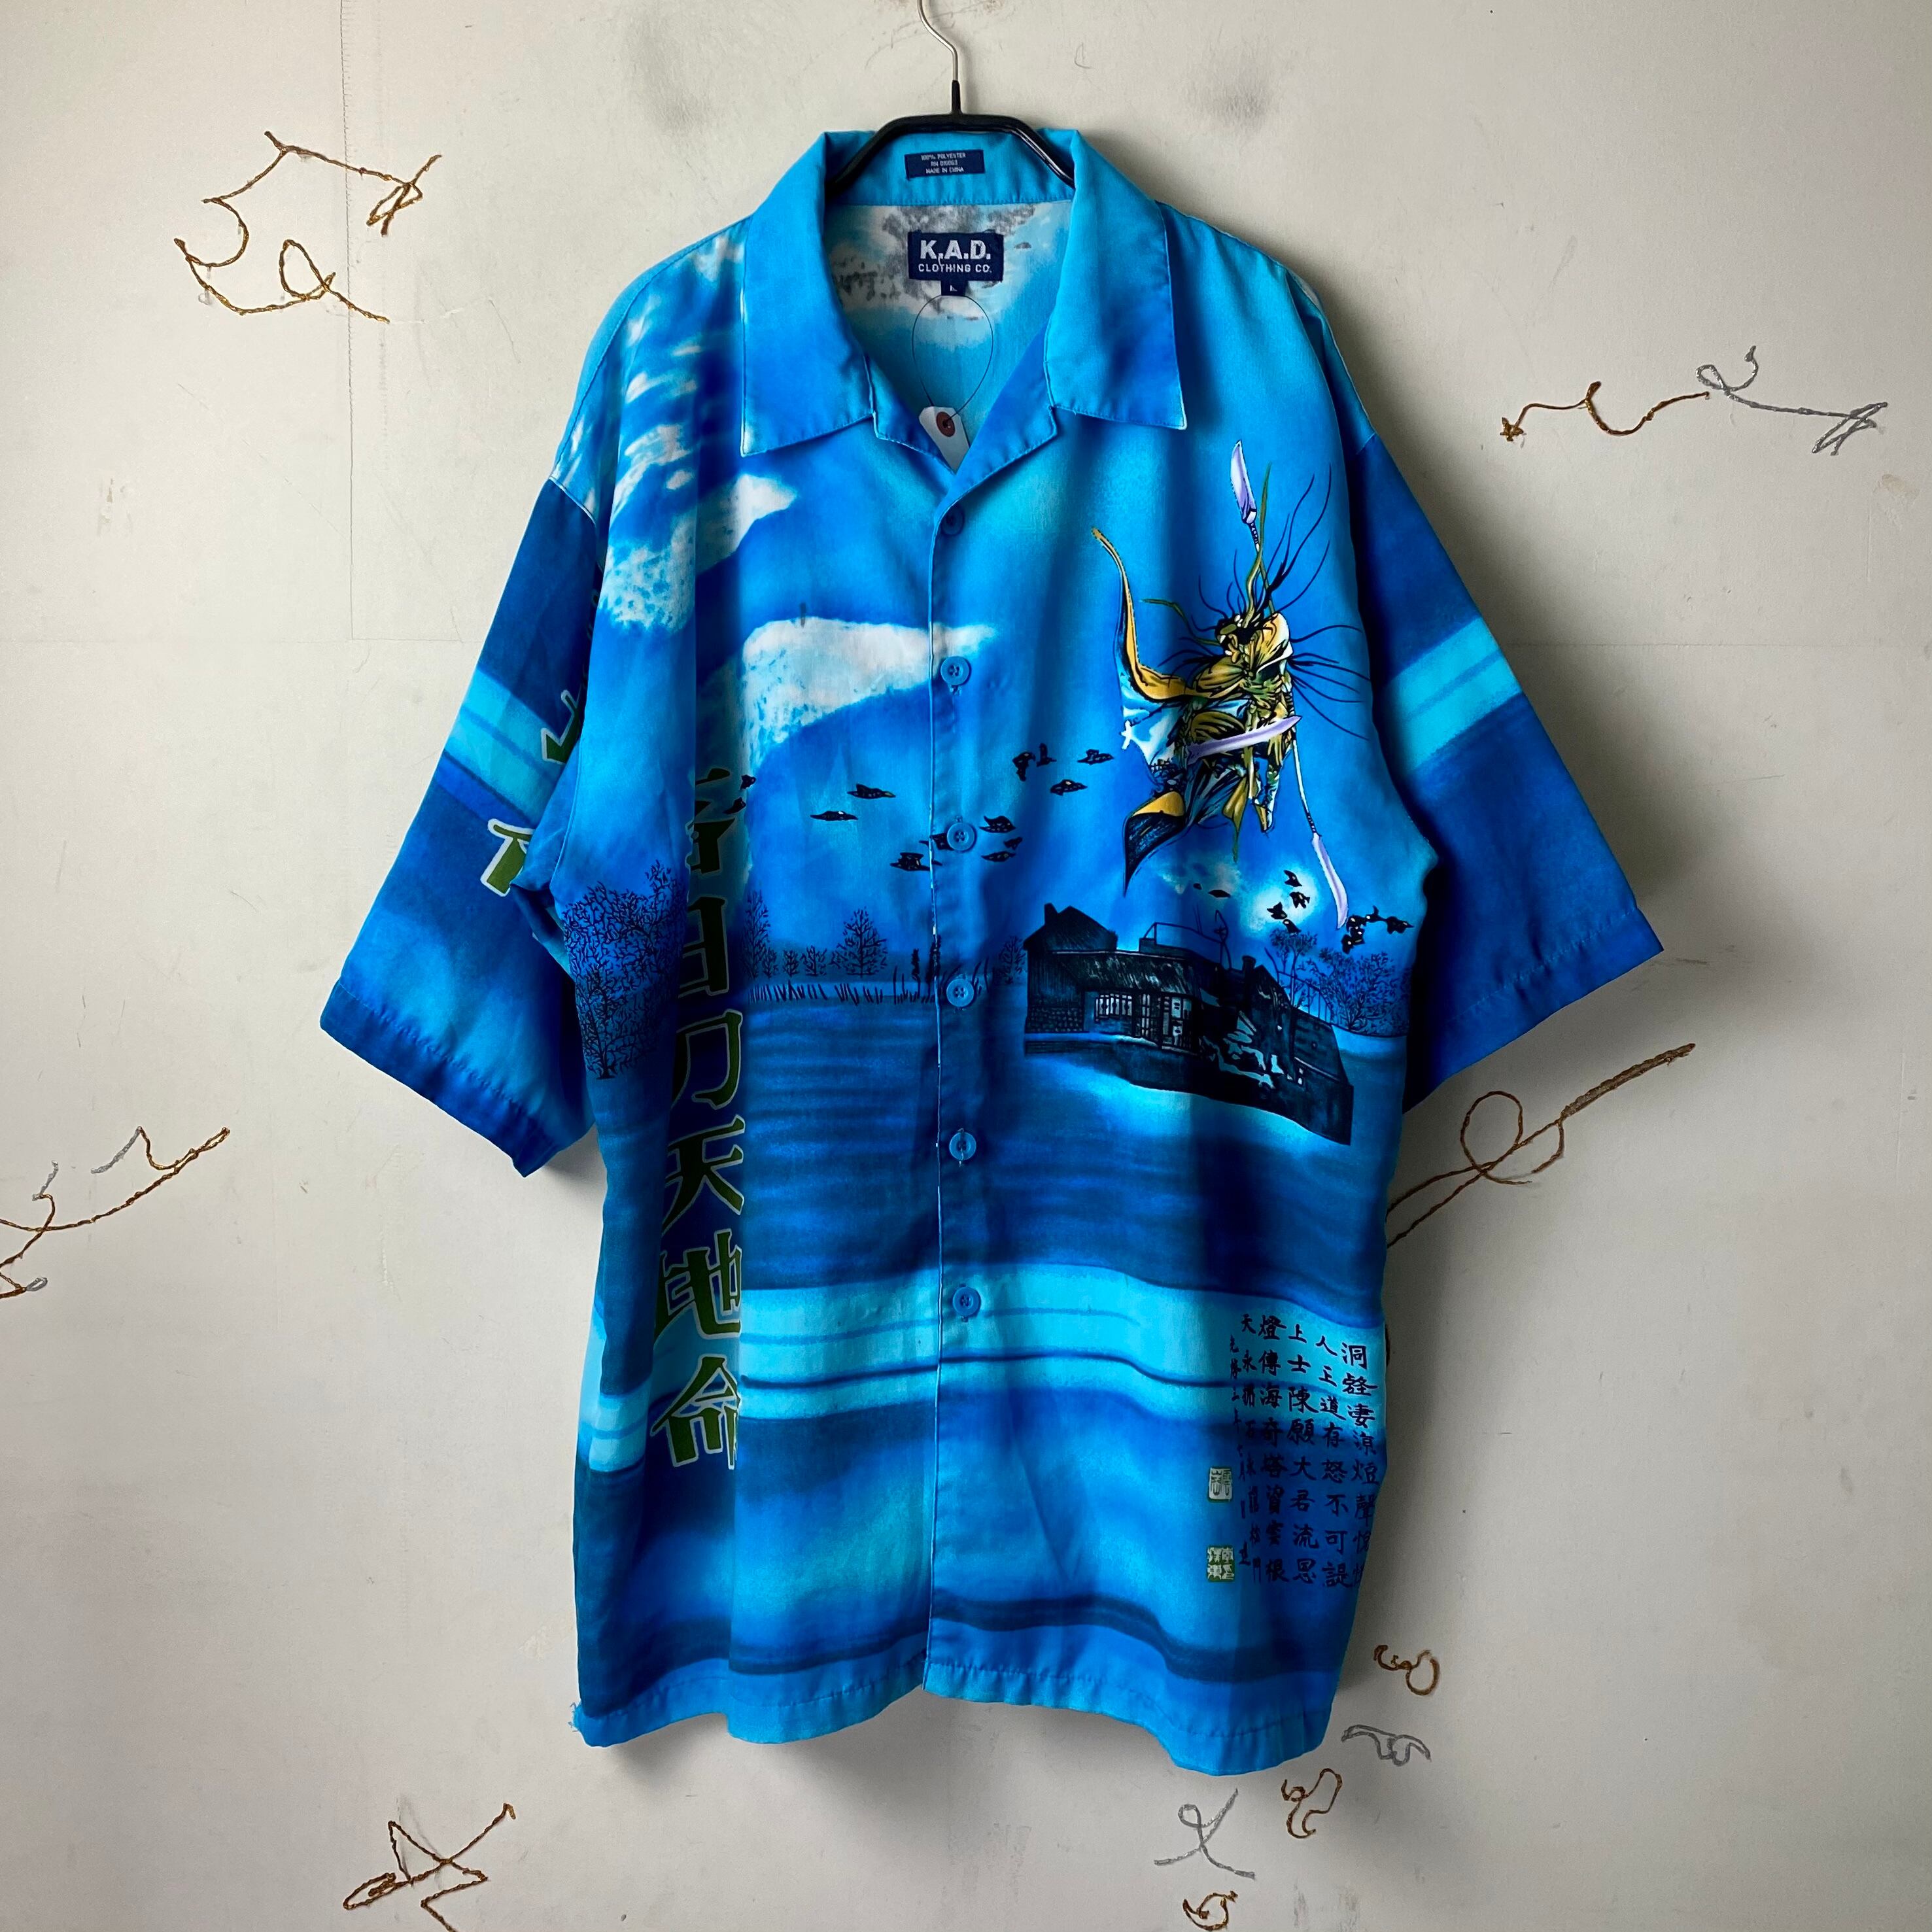 old pattern polyester shirt